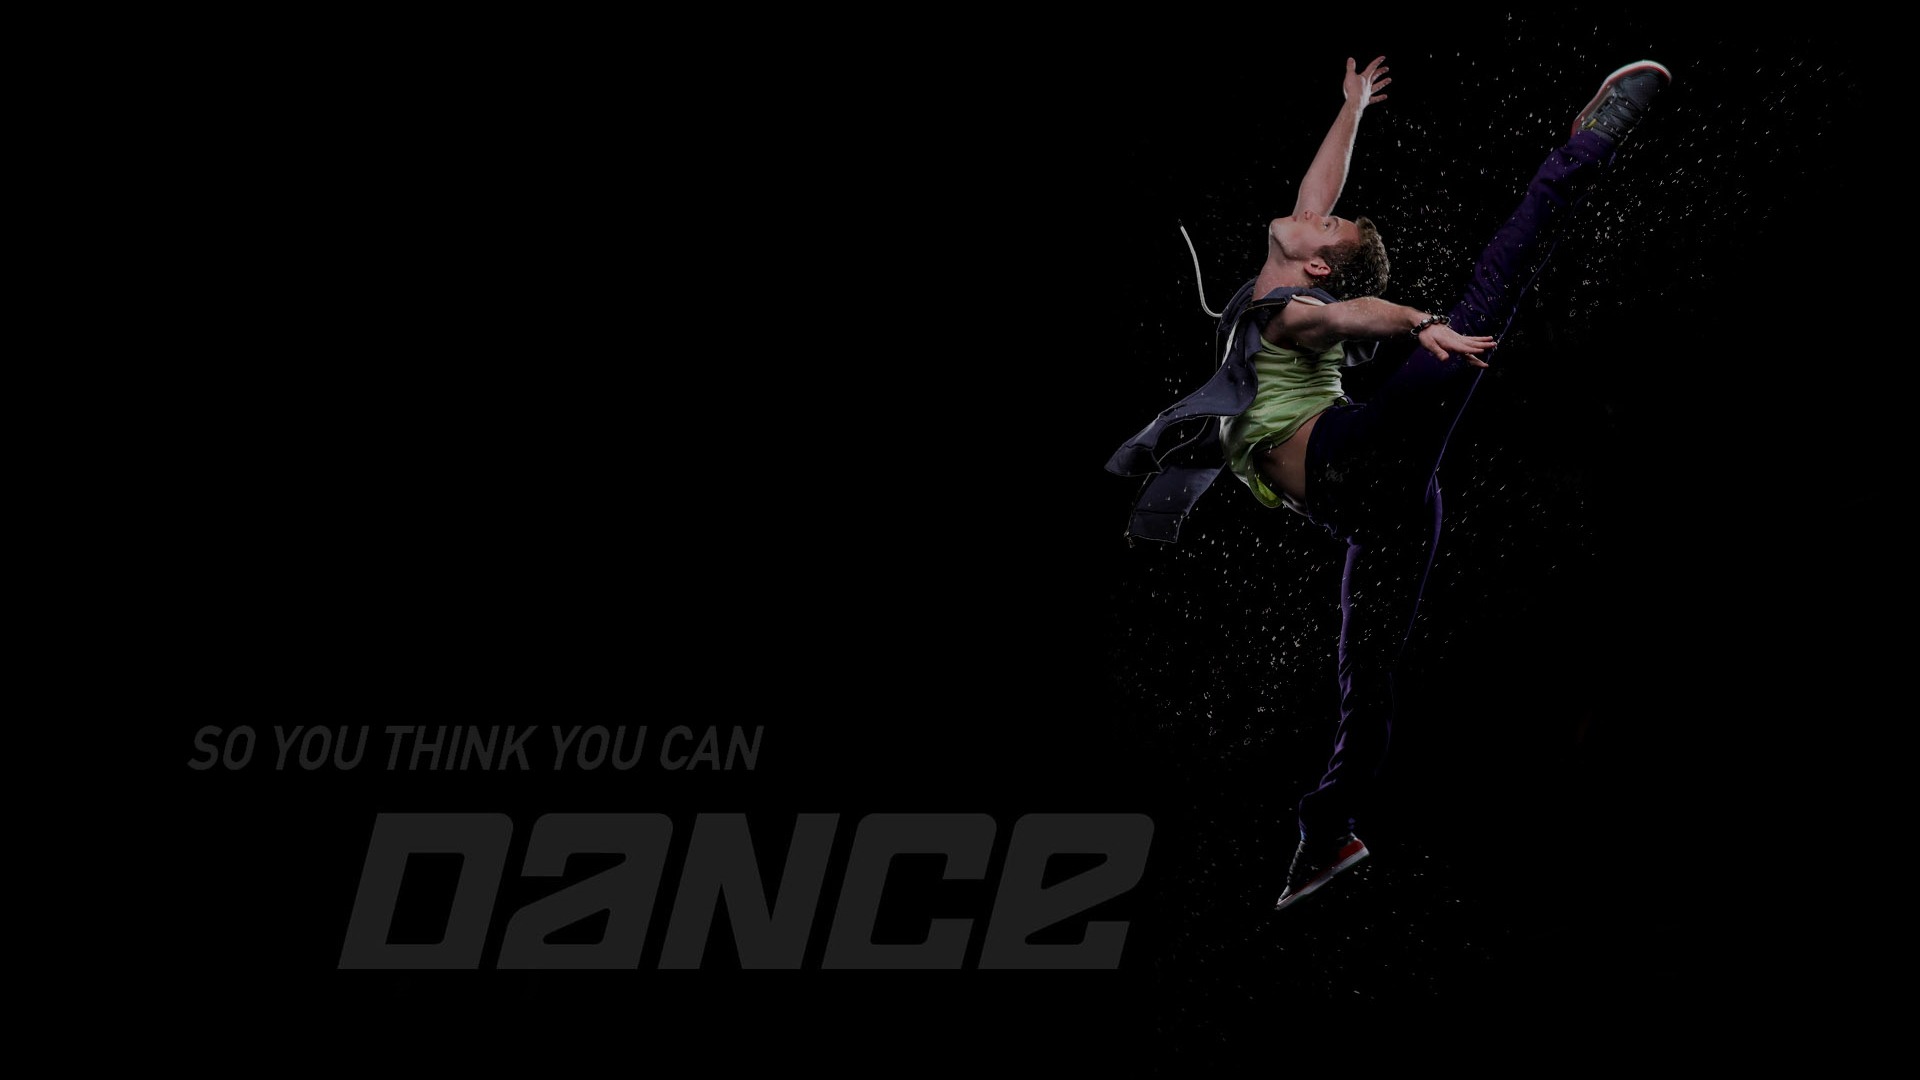 So You Think You Can Dance wallpaper (2) #8 - 1920x1080